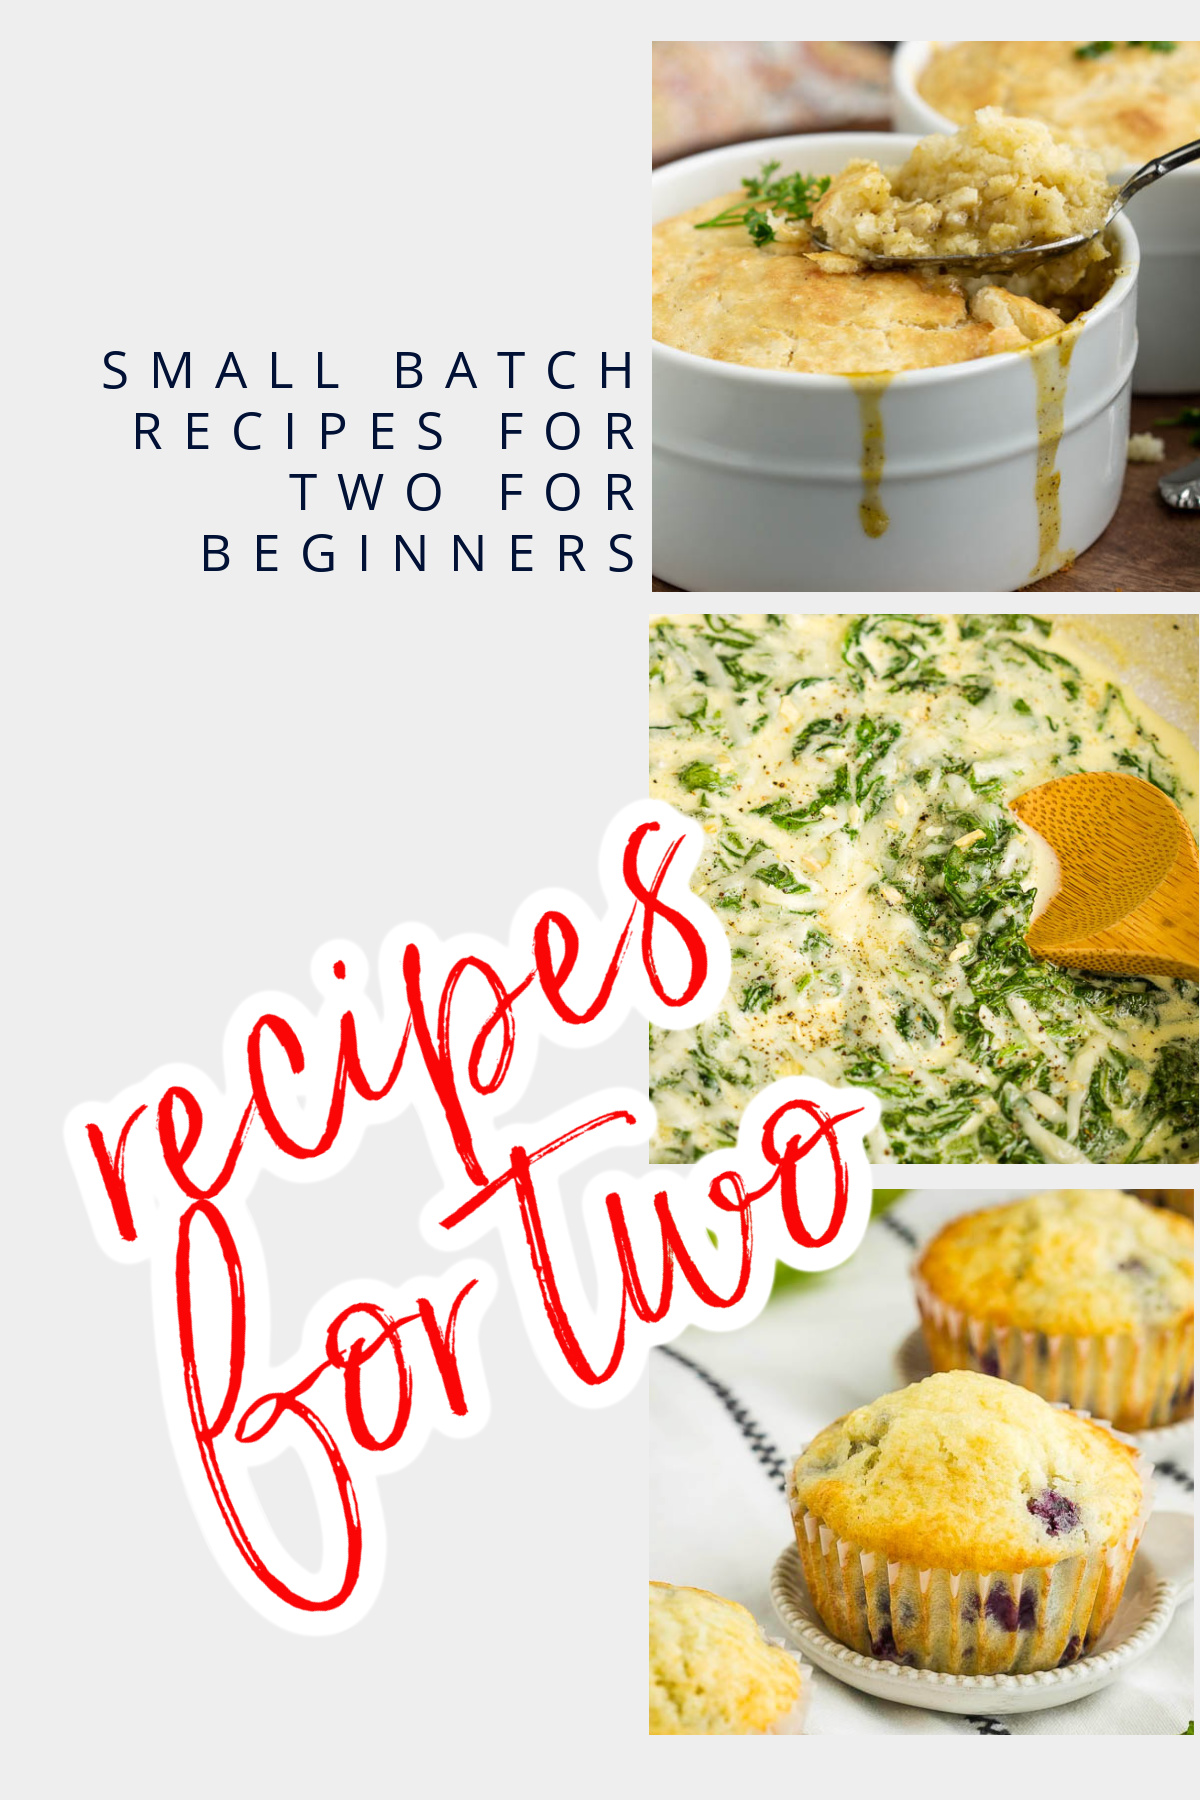 Recipes for Two for Beginners